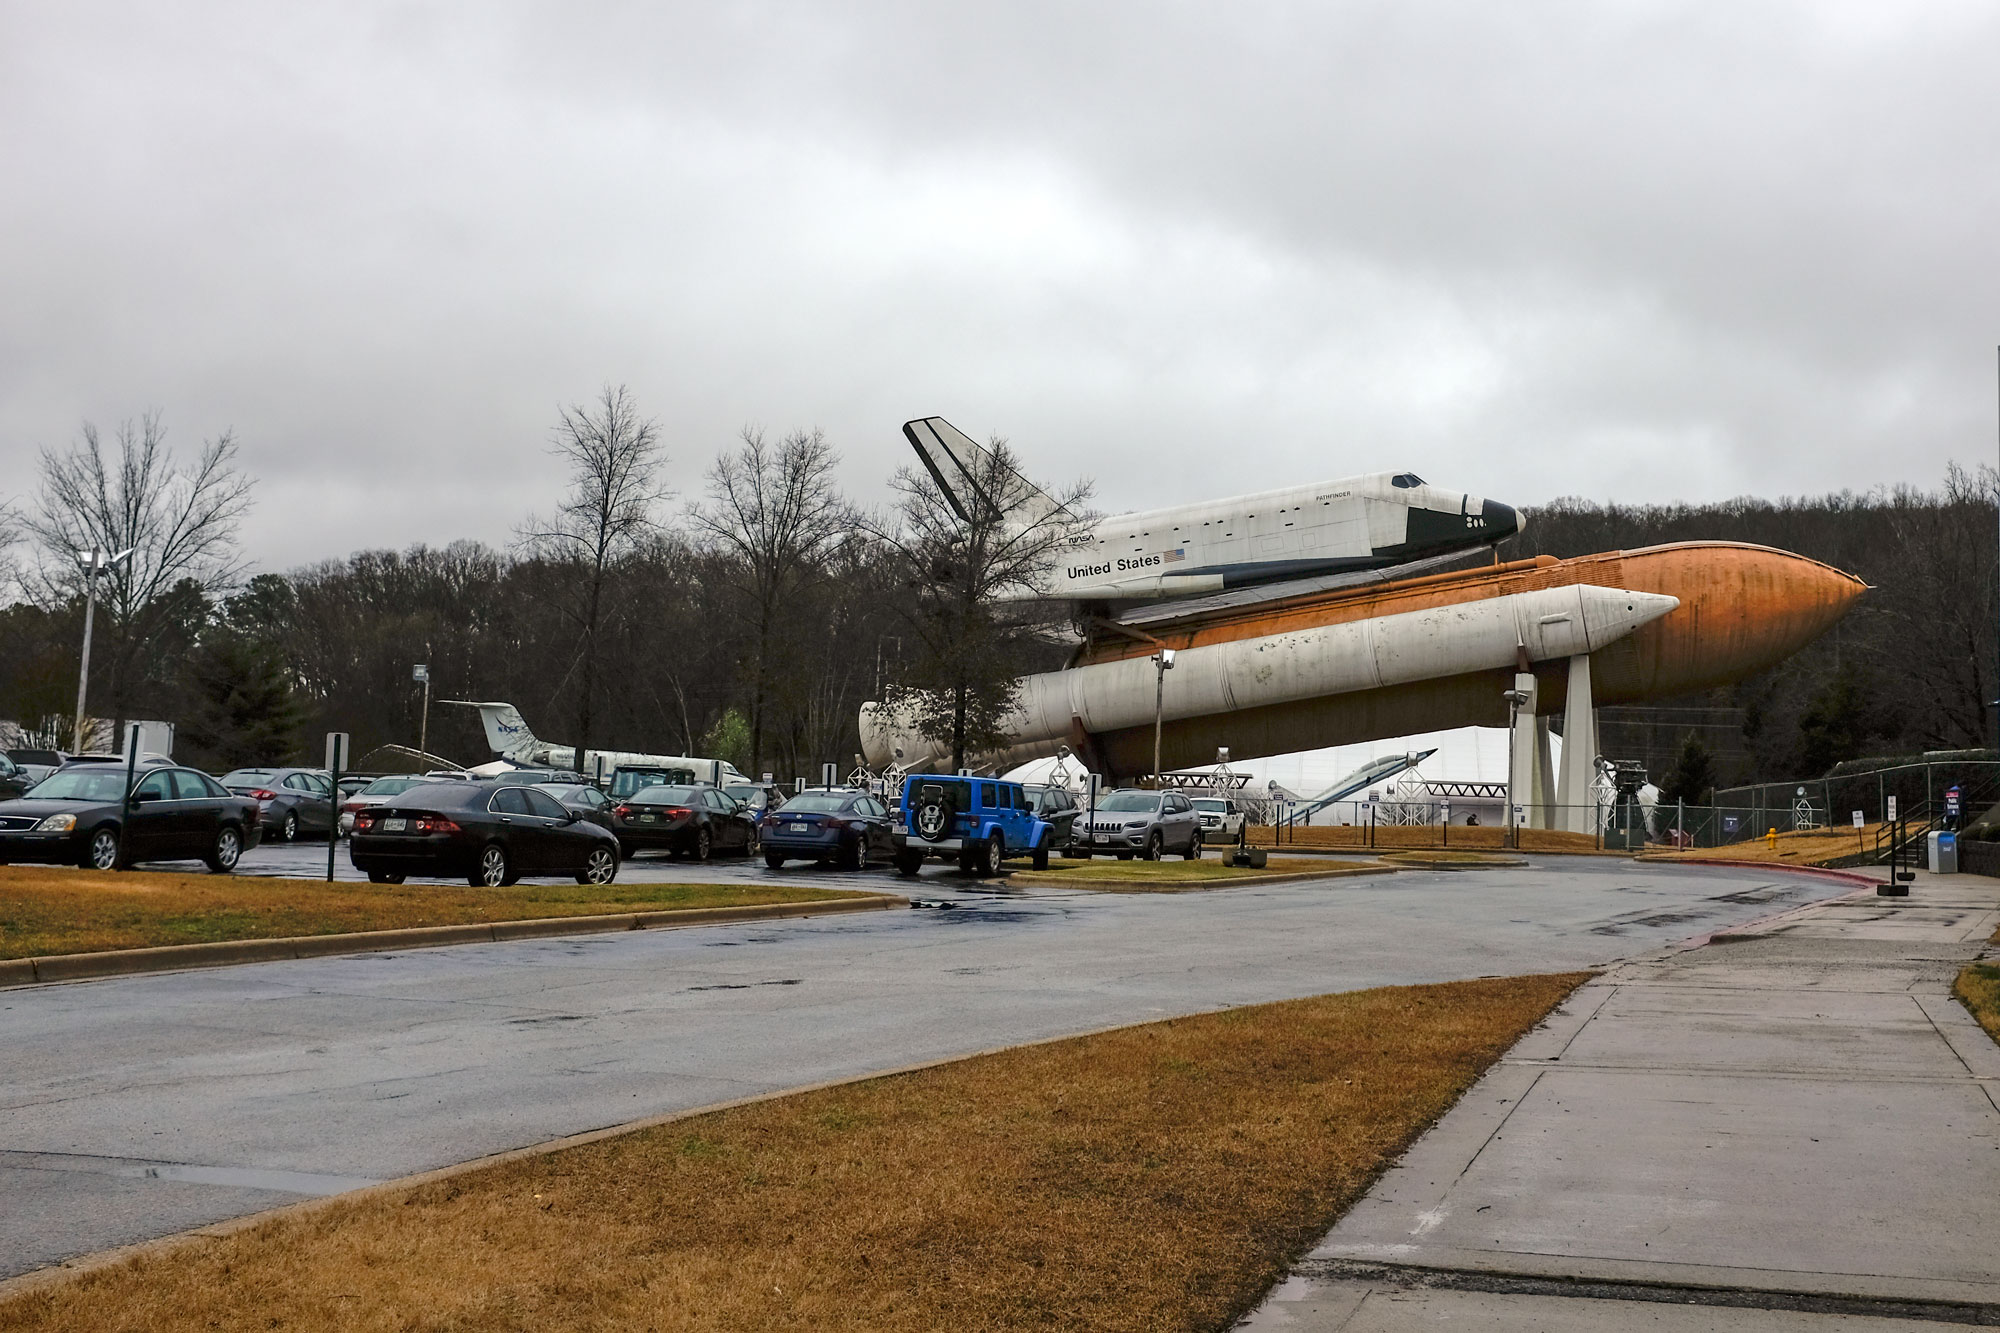 A space shuttle outside the US Space & Rocket Center